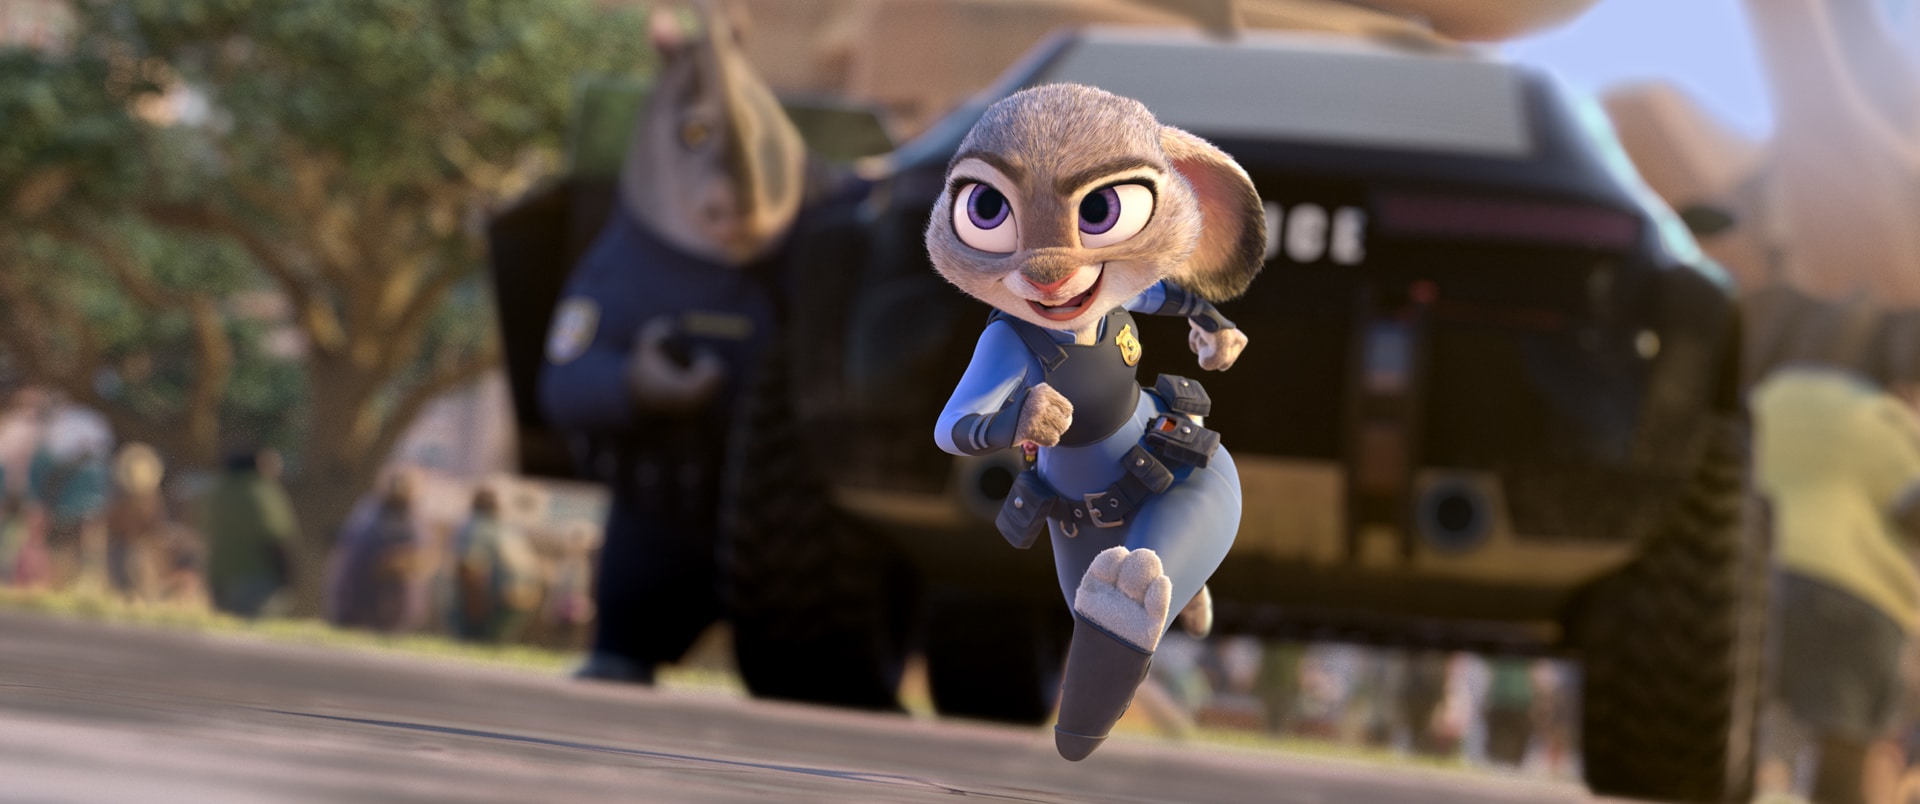 First Look: Disney's ZOOTOPIA New Trailer Featuring Shakira's New Song "Try Everything"